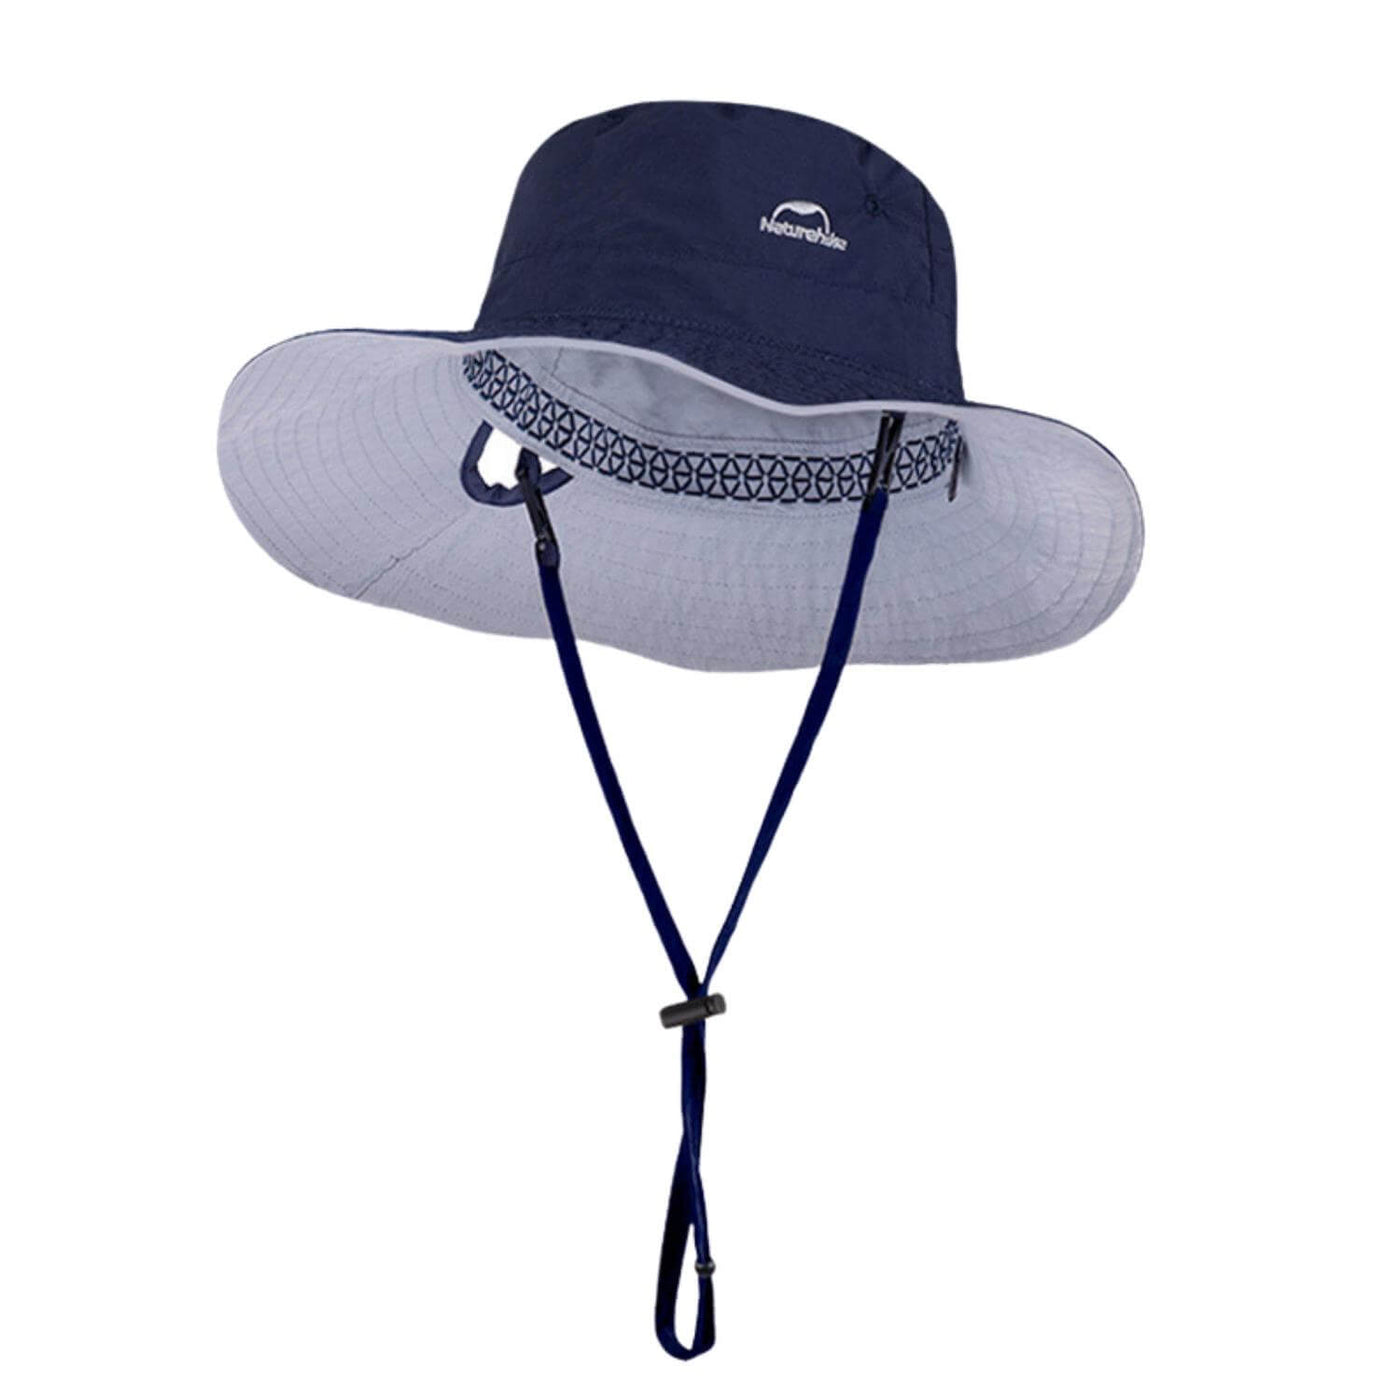 Fisherman hat with UV protection - Unisex